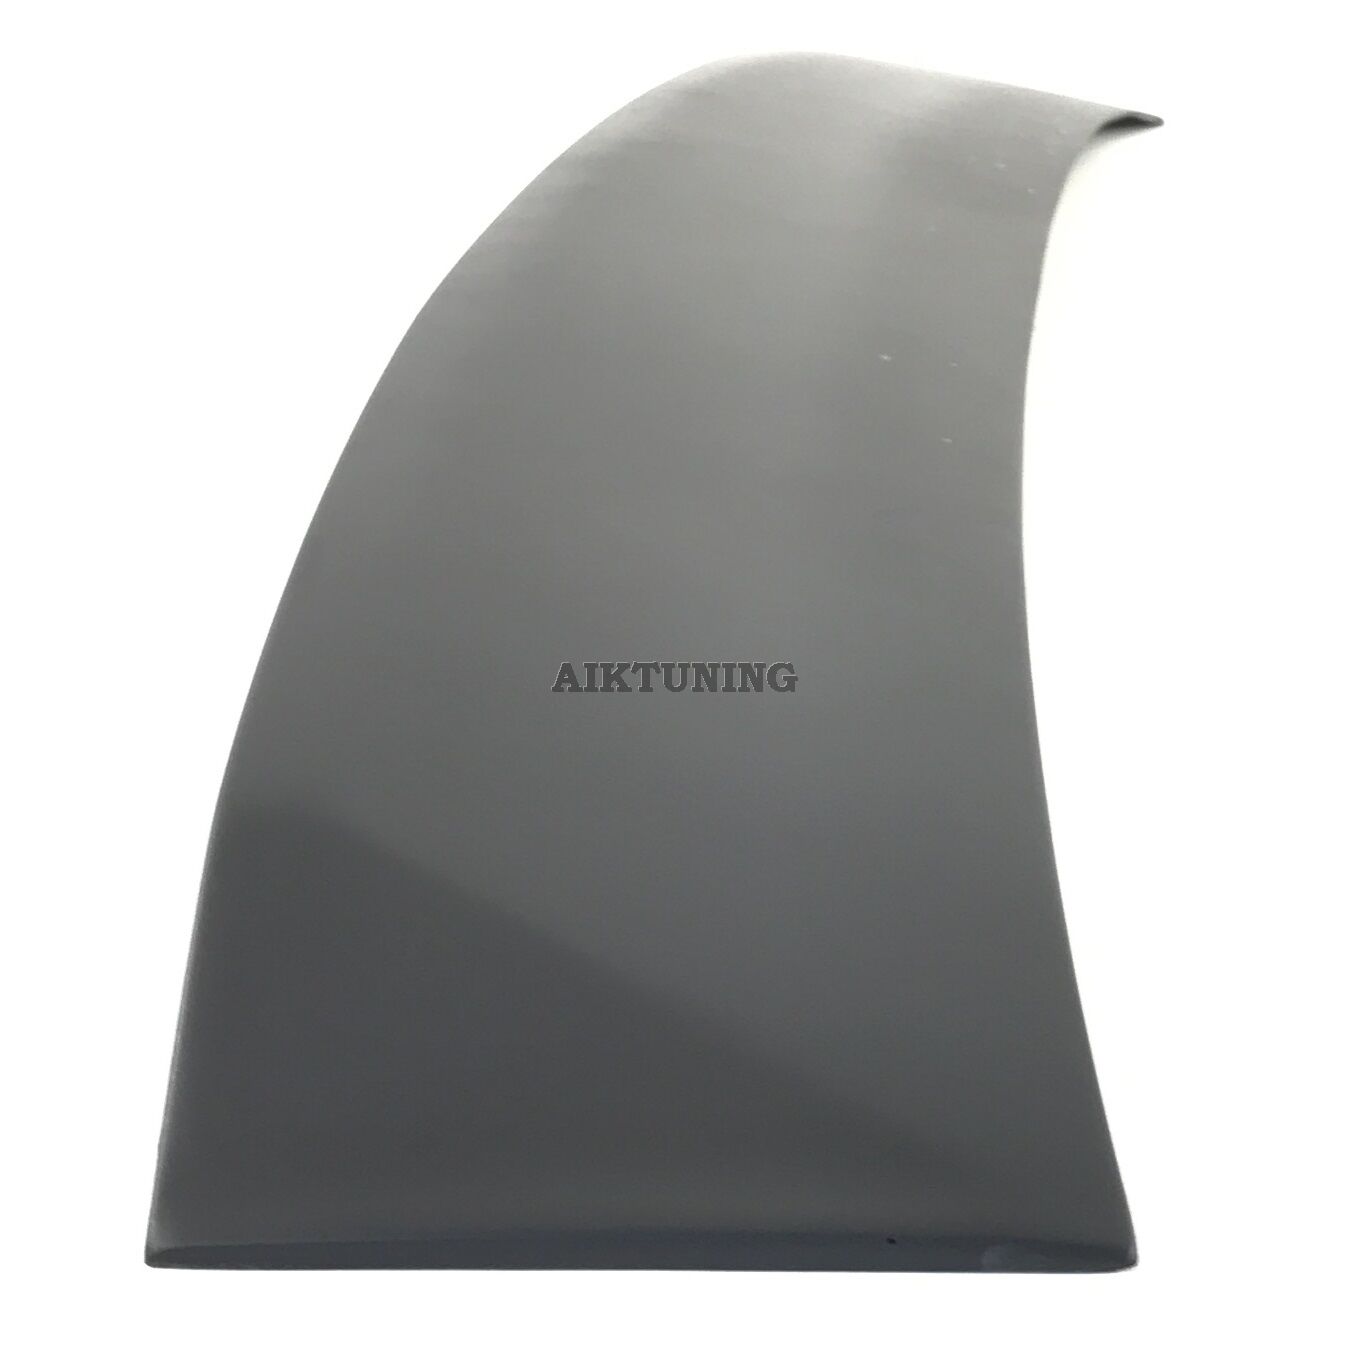 Rear Window Sun Guard Roof Extension Spoiler Cover (Fits Audi A6 C5 1997-2004)